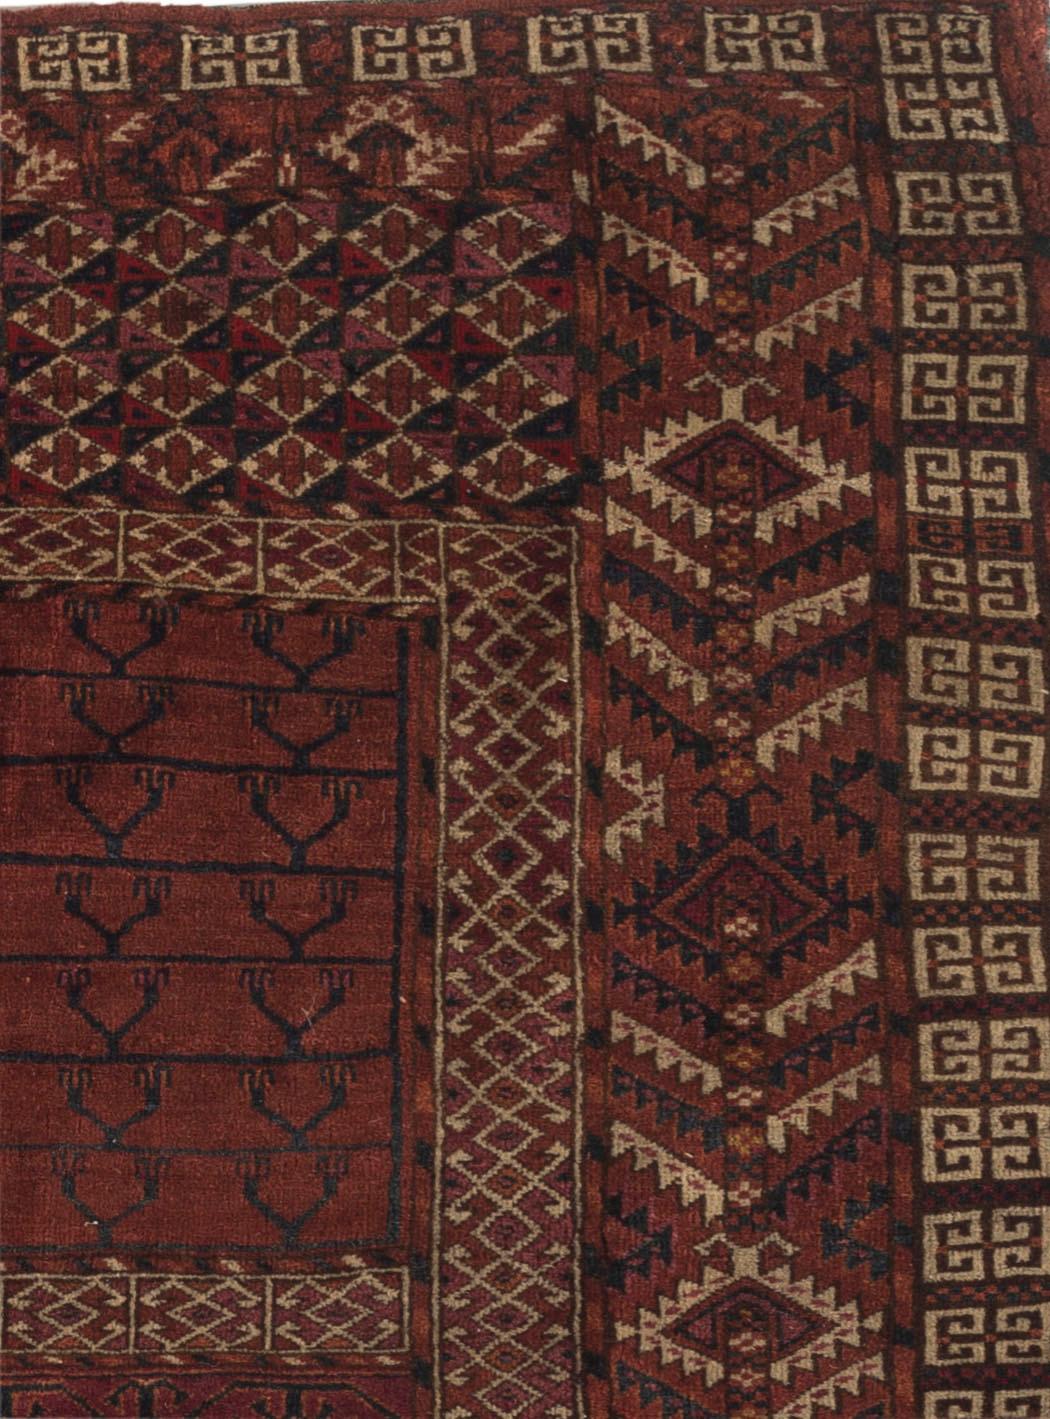 Antique Hachlo Bokhara rug, circa 1880. Bokara or Bokhara rugs are named after the city where they were sold. These rugs were made by Turkoman tribes, and these weavers gave the rug its distinctive design. At the end of the 20th century, carpet